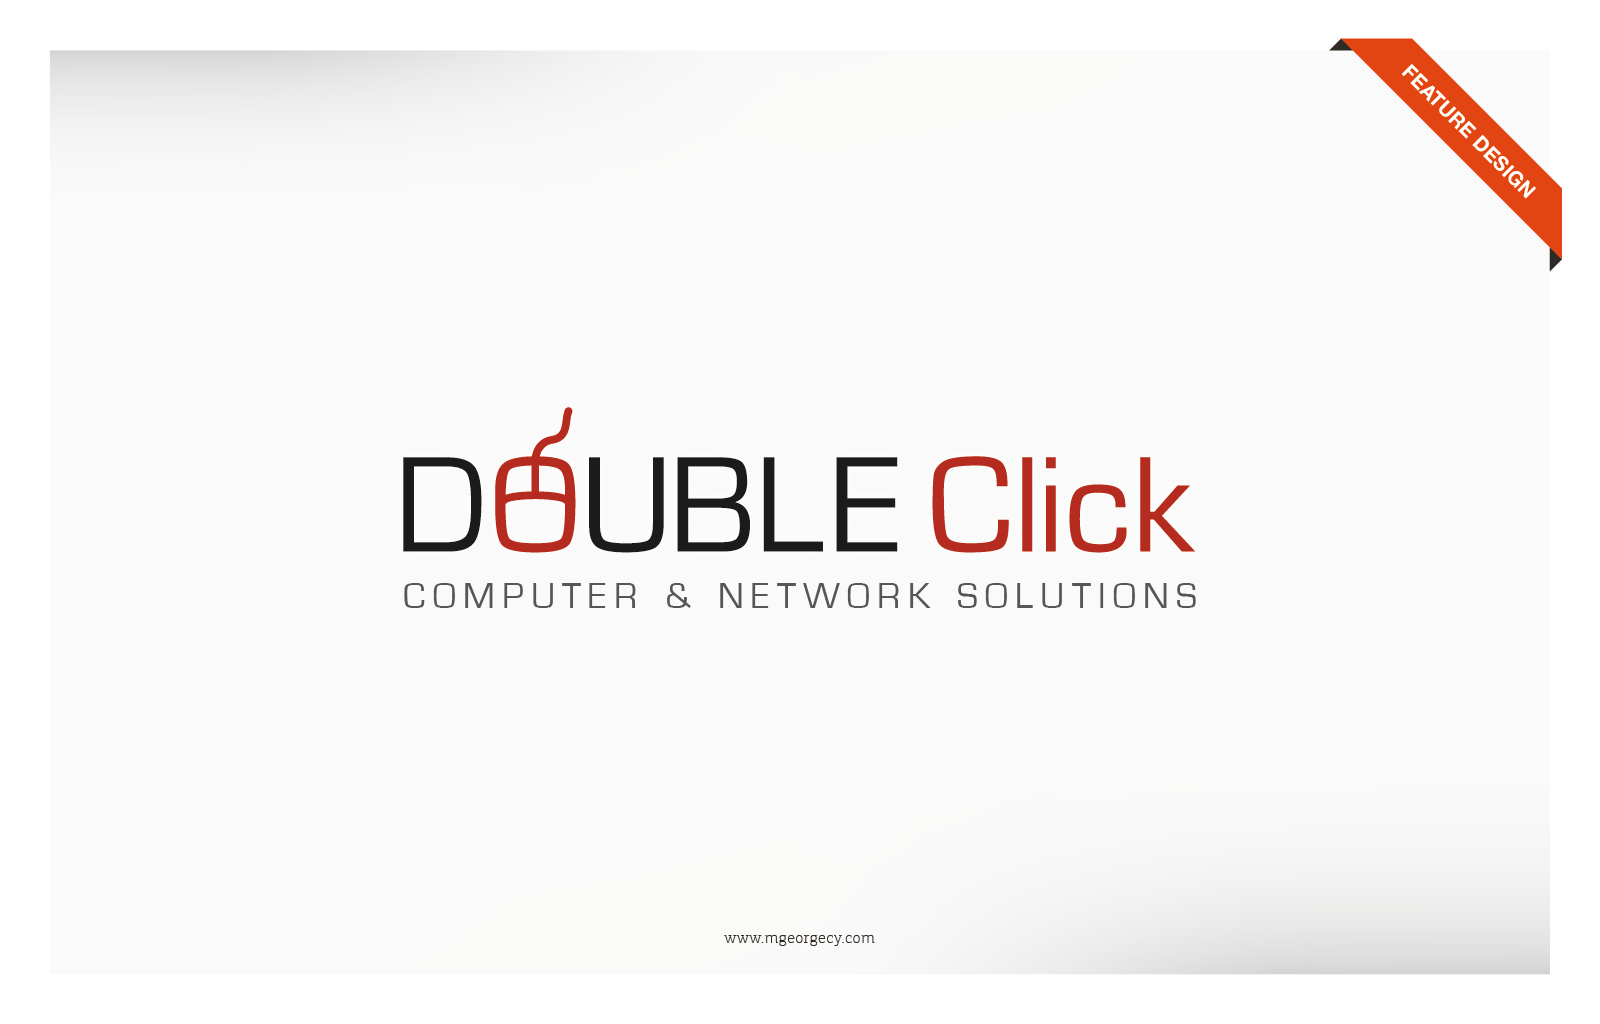 Double Click Logo - Double Click | mgeorgecy